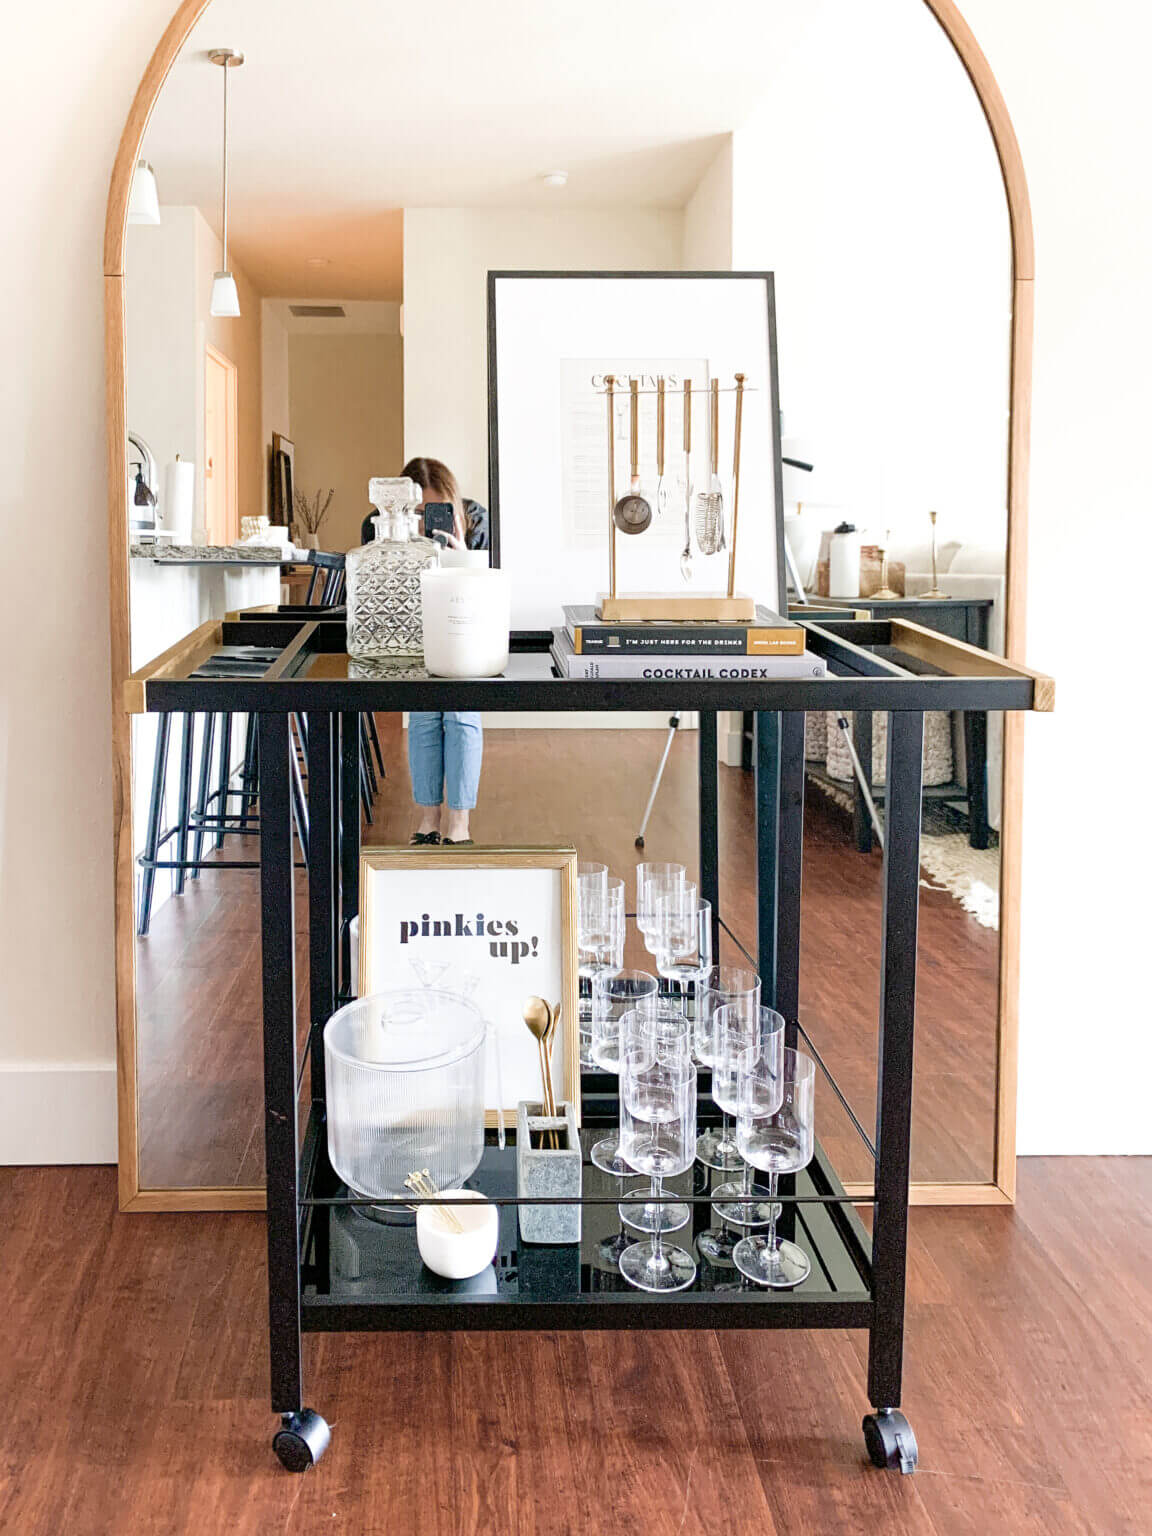 In Ideas For Small Living Room Furniture Placement, this is a bar cart set up with drinks in front of a floor mirror